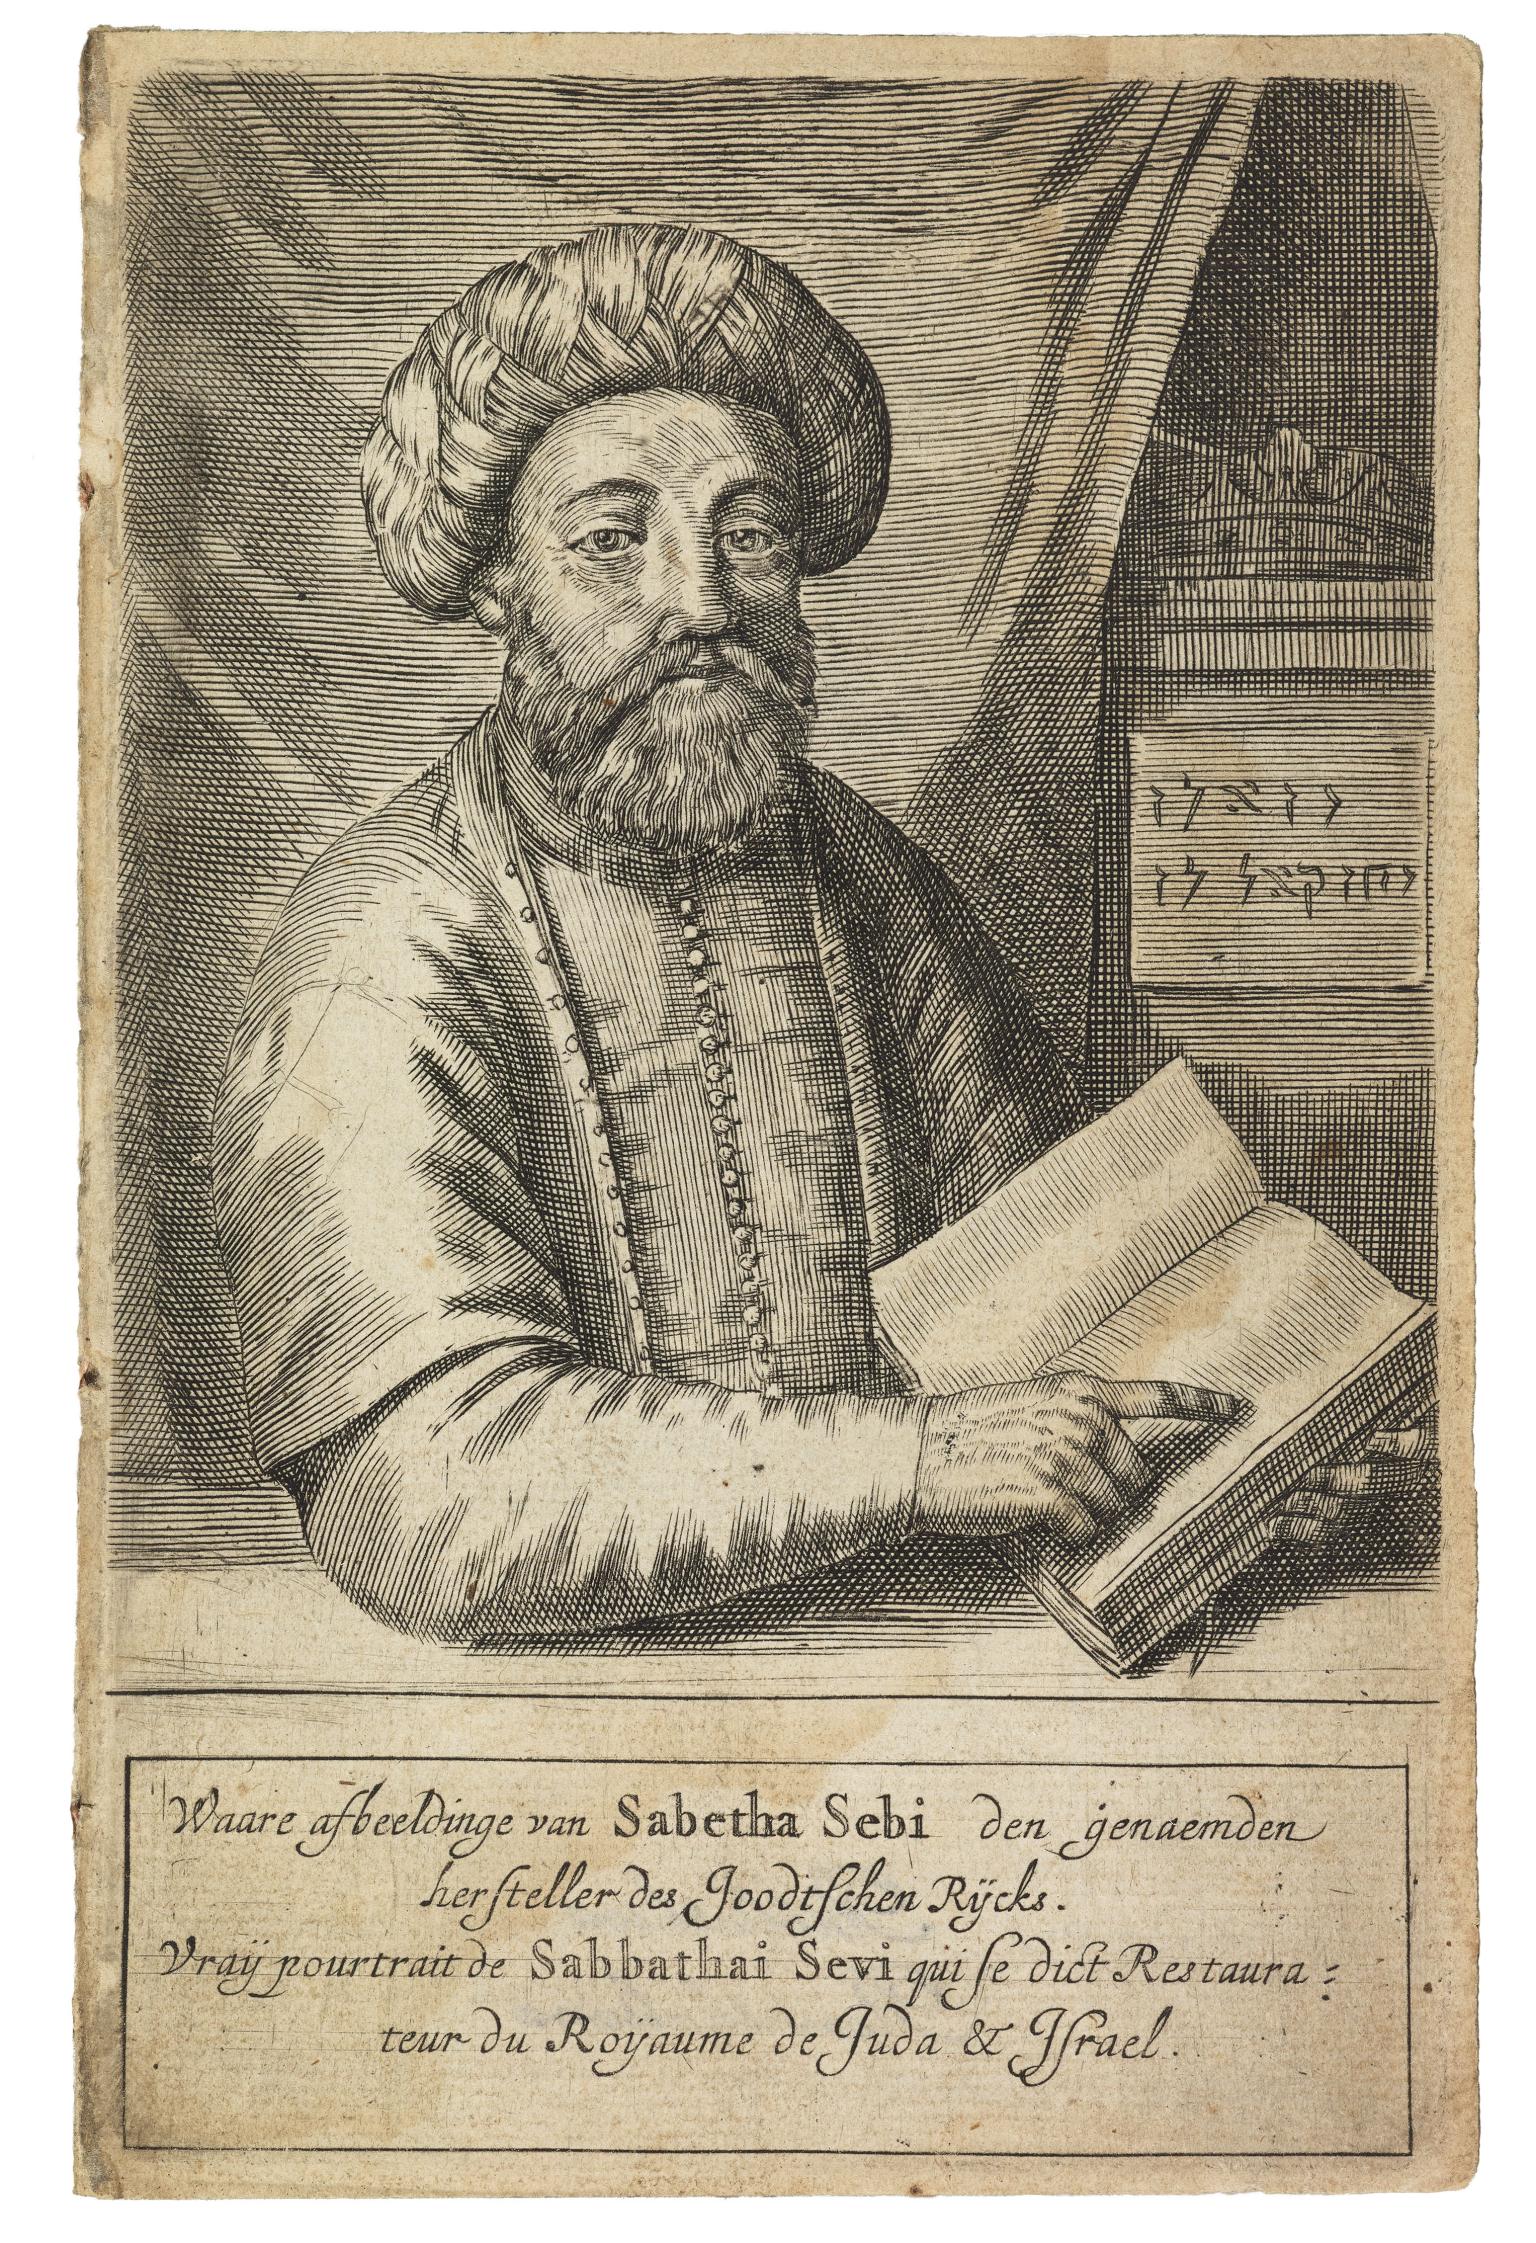 Print engraving of man in turban pointing to open book with Dutch and French text underneath.